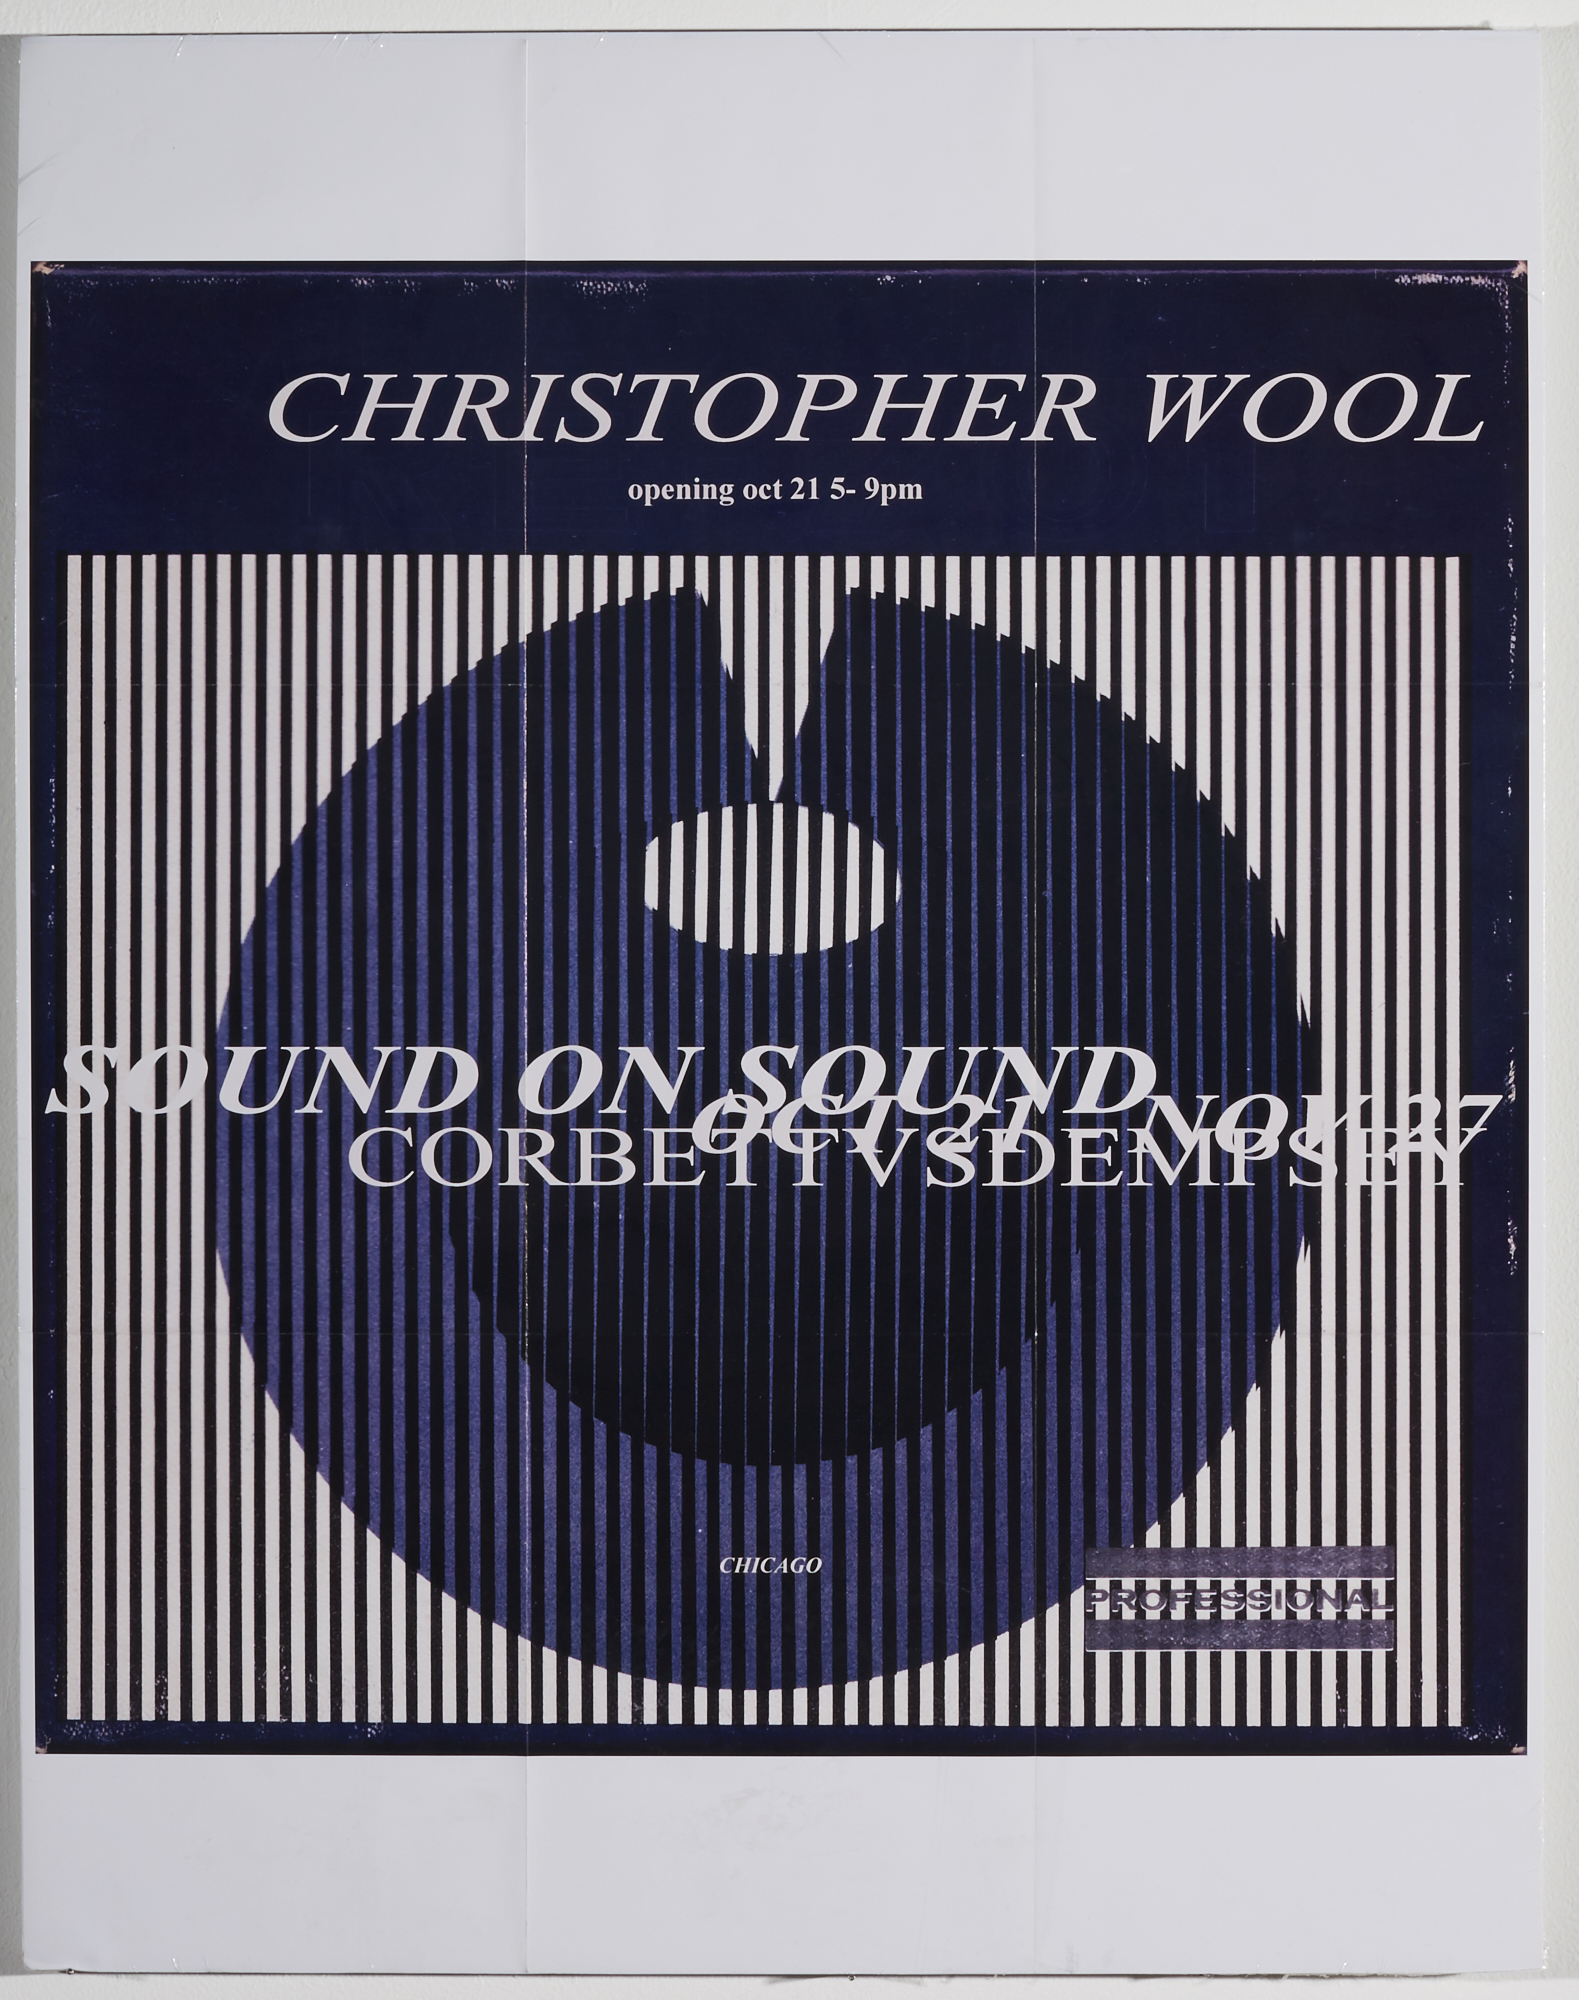 (WOOL, CHRISTOPHER). Wool, Christopher - CHRISTOPHER WOOL: EXHIBITION POSTER FOR 